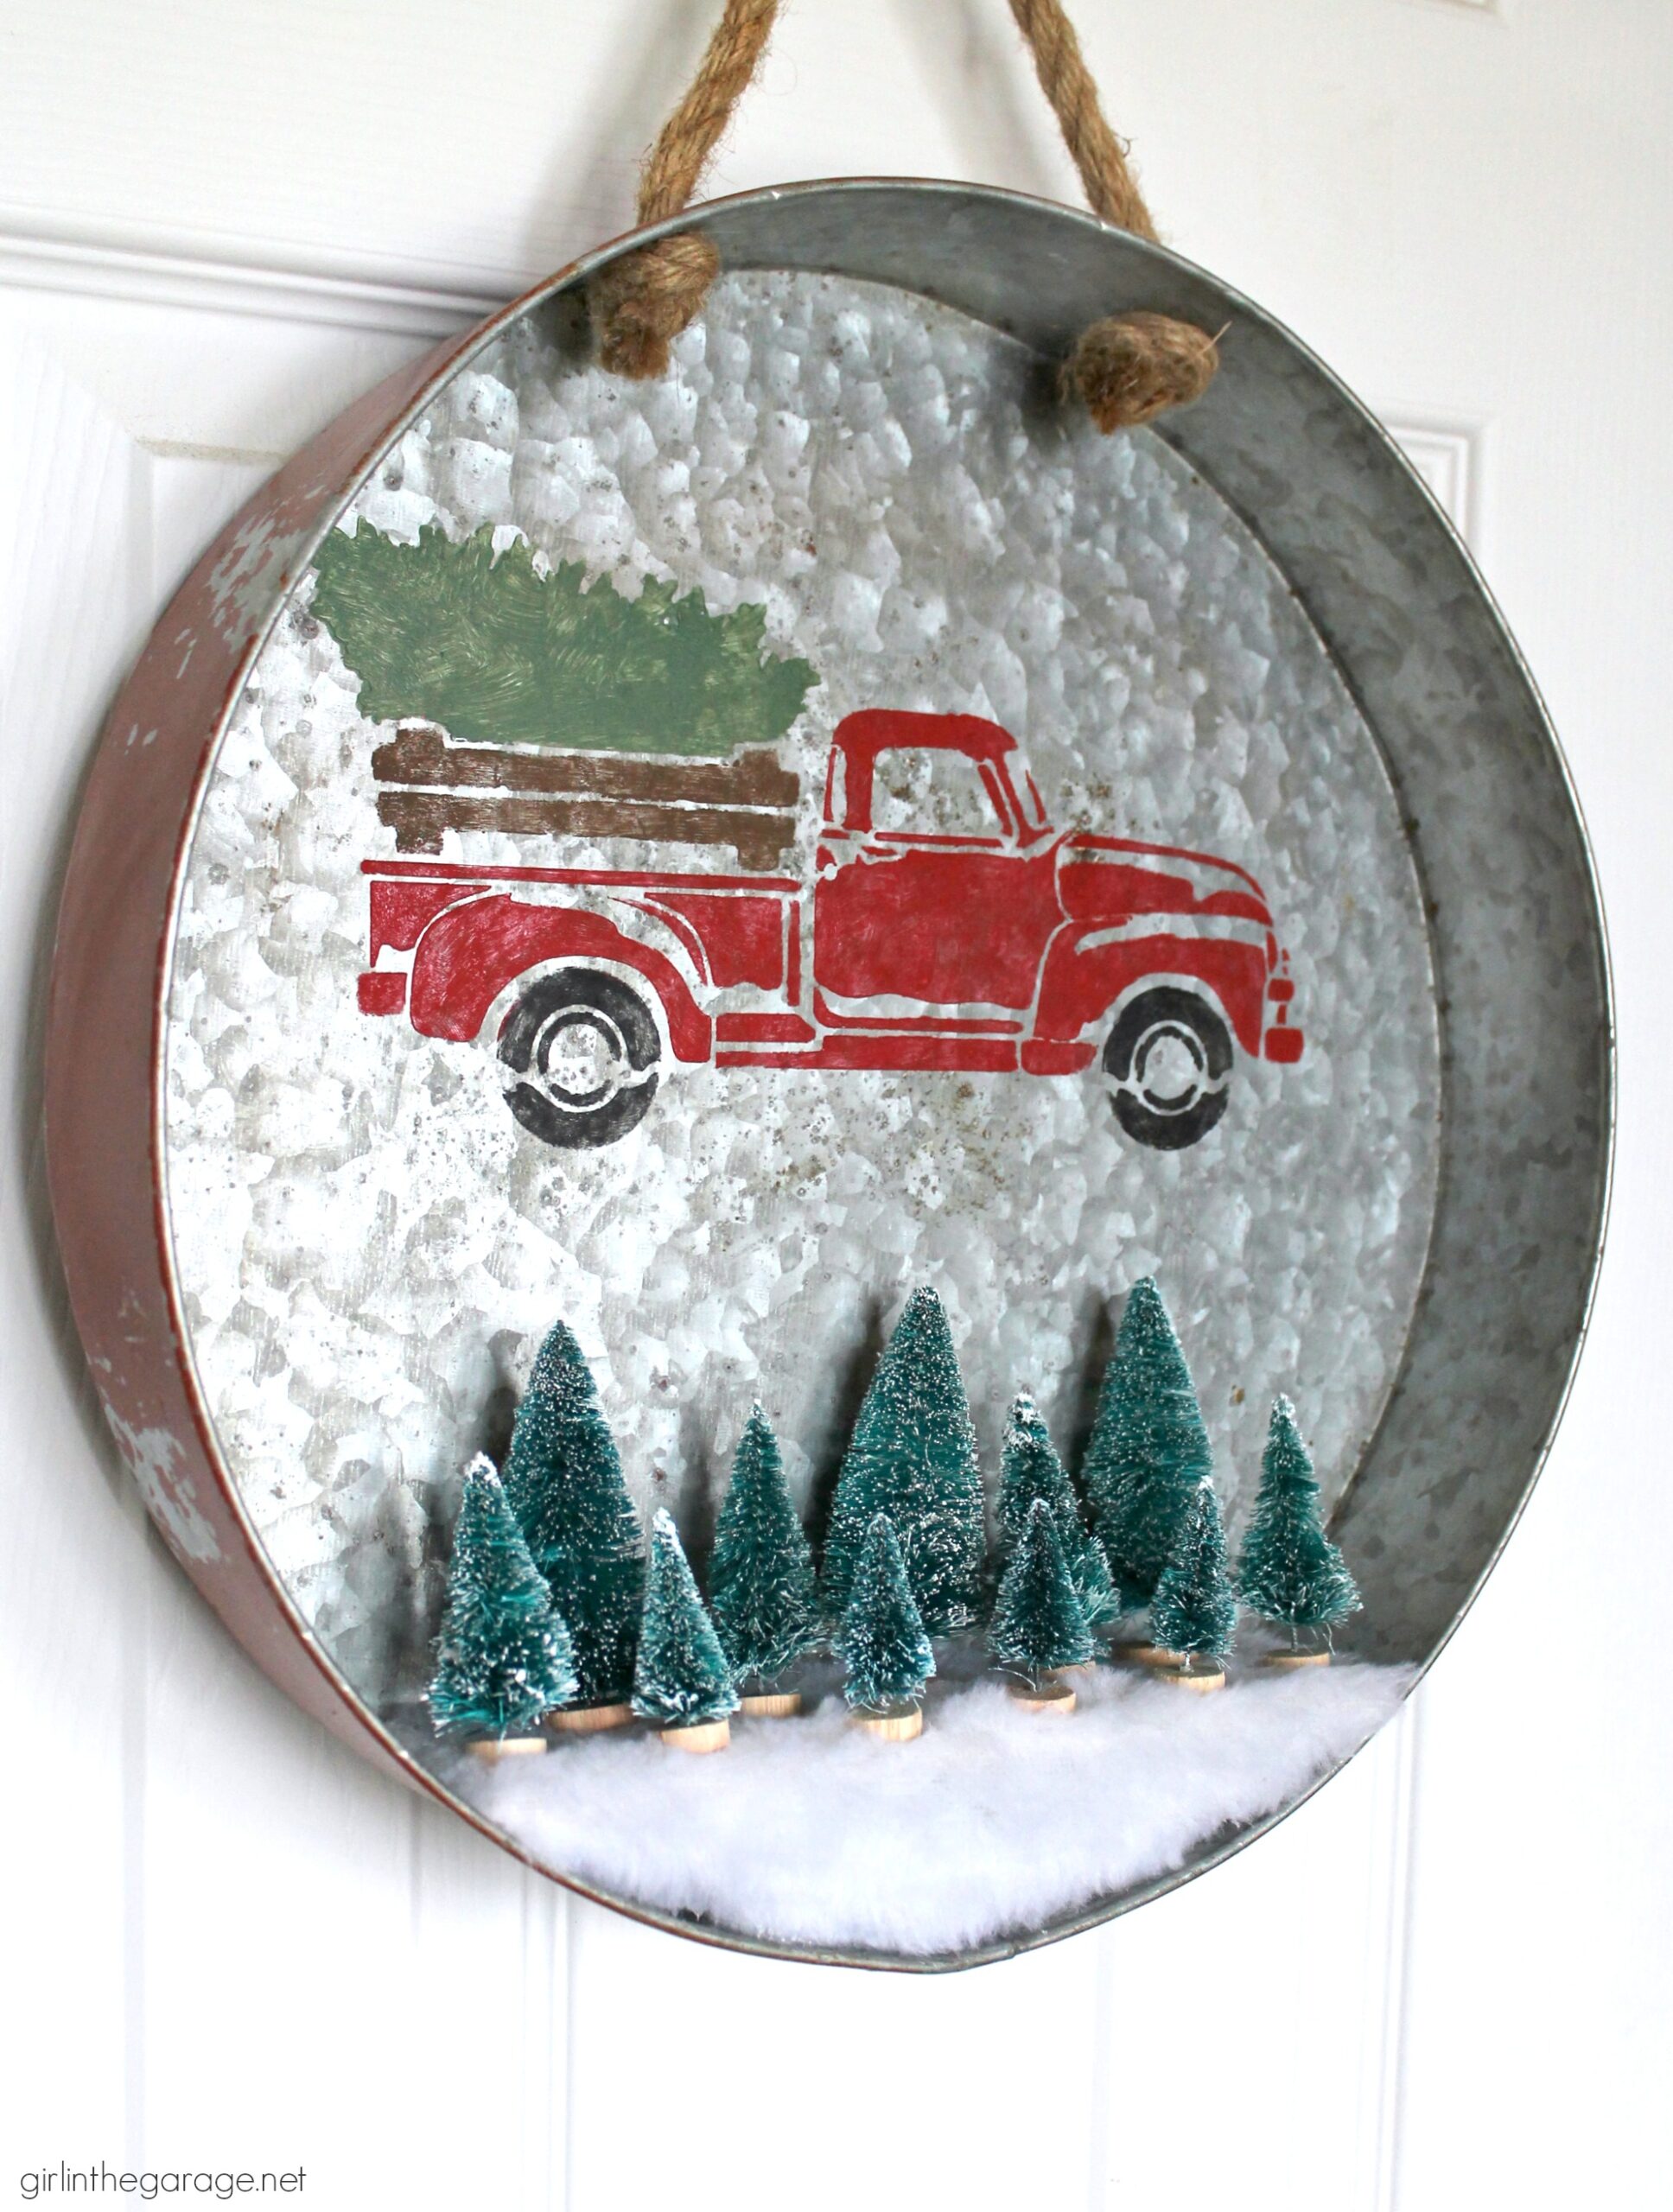 Make a DIY Christmas wreath from a repurposed metal tray - an adorable Christmas decor idea with stenciled truck and miniature bottle brush trees! By Girl in the Garage